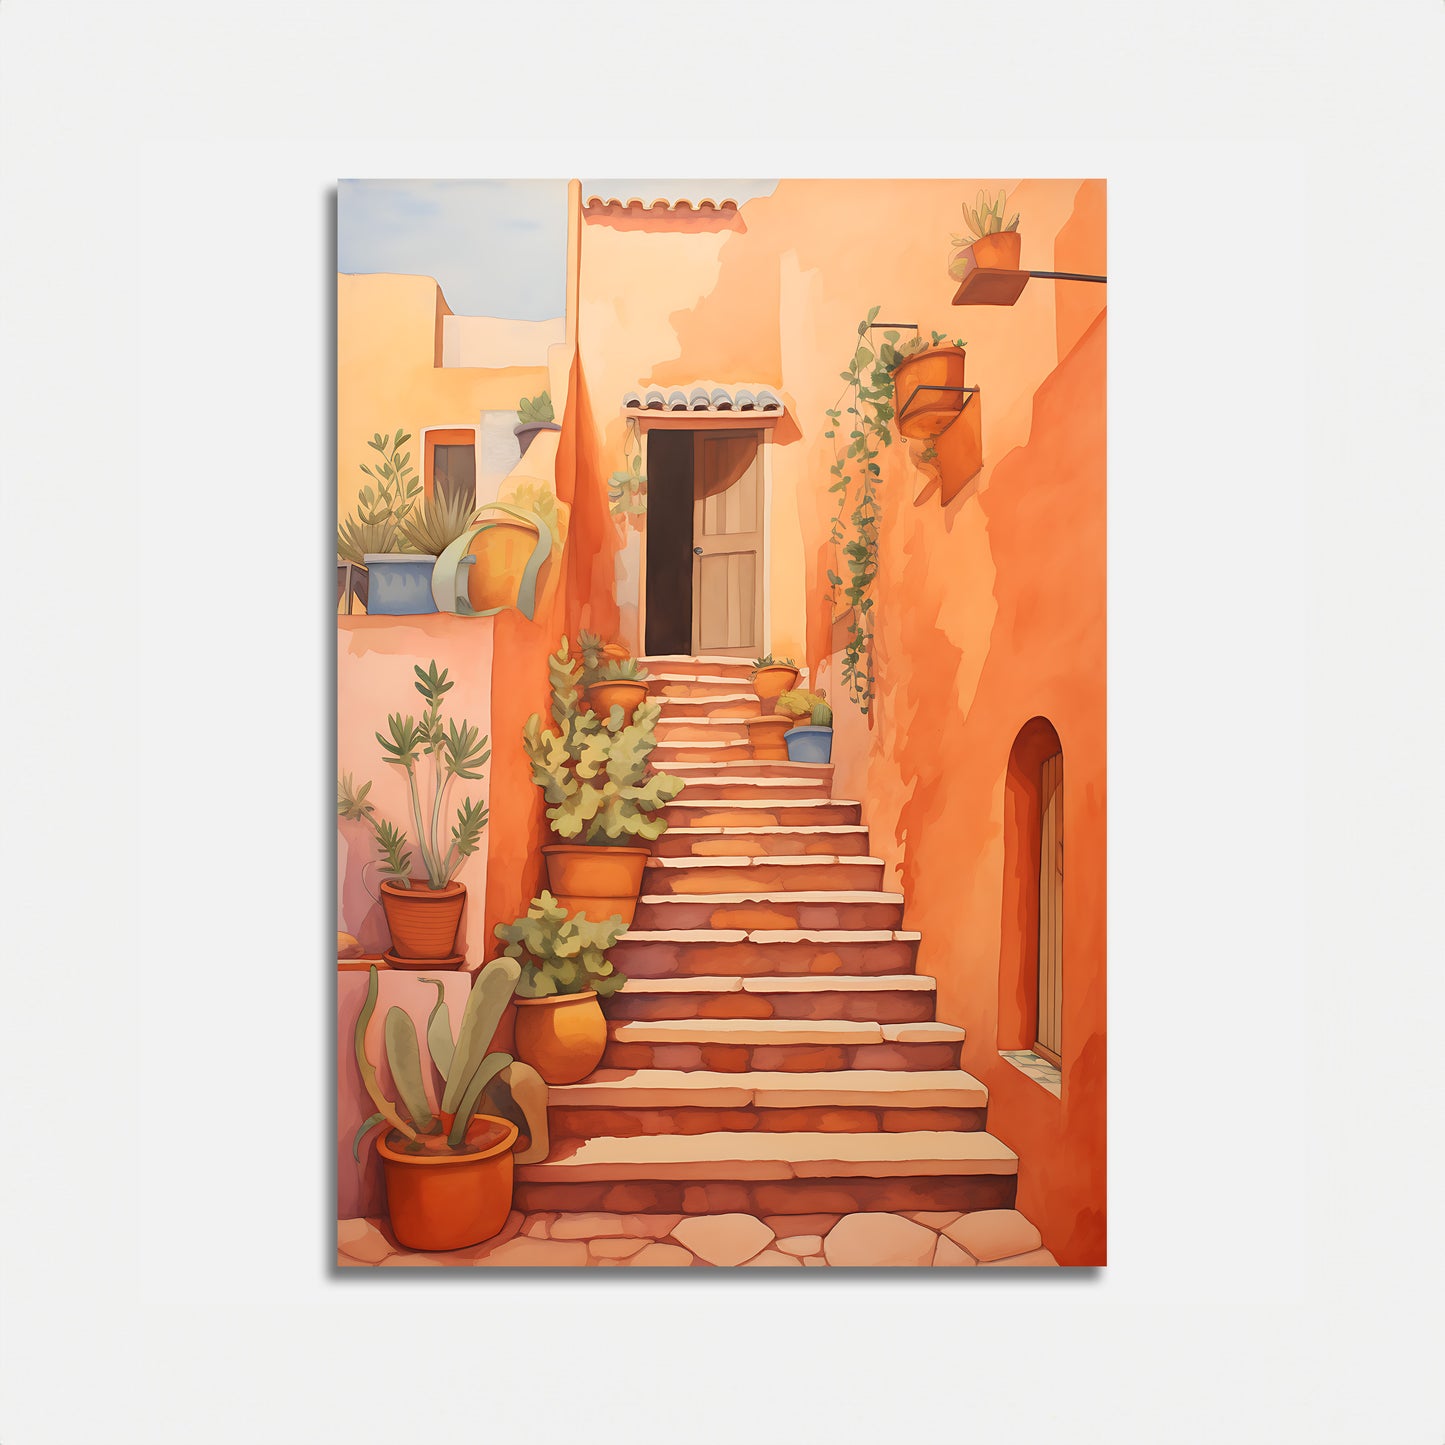 A colorful painting of a sunny Mediterranean-style stairway with potted plants.